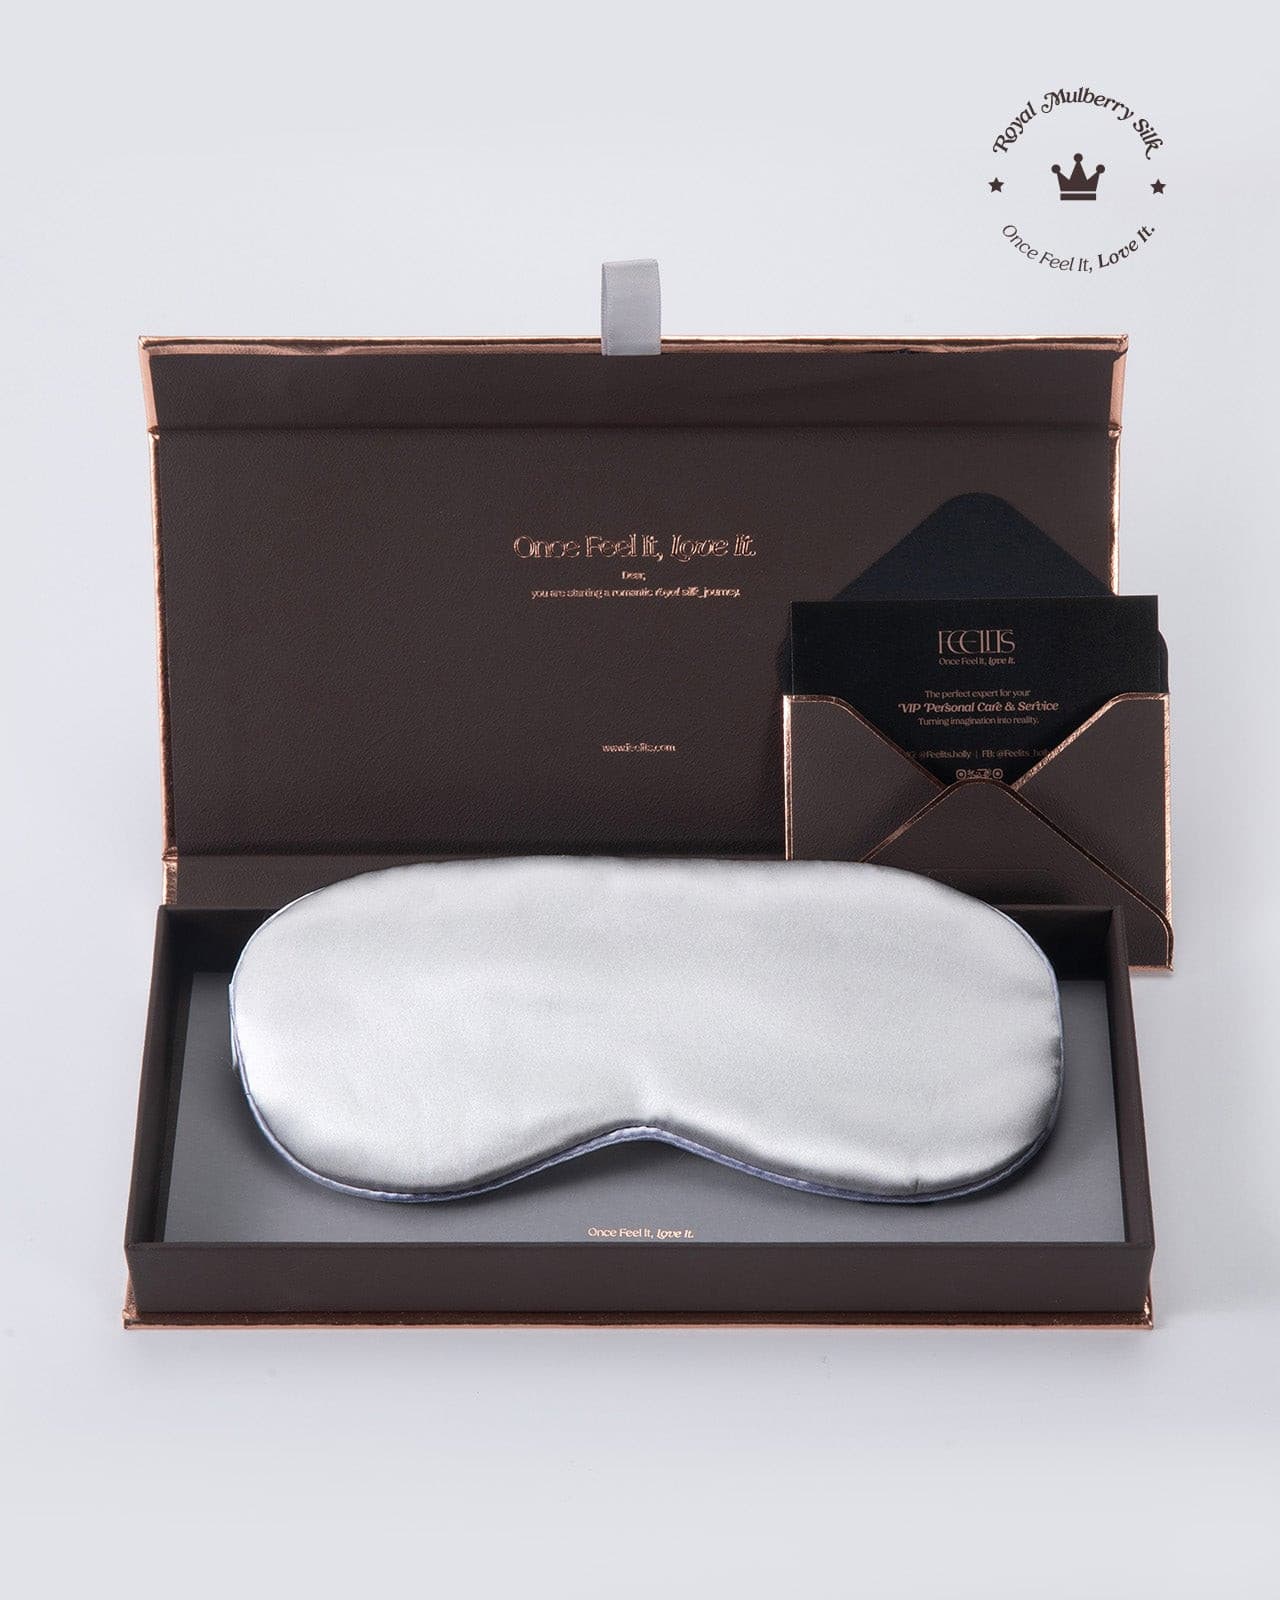 Slip Silk Sleep Mask, Navy (One Size) - 100% Pure Mulberry 22 Momme Silk  Eye Mask - Comfortable Sleeping Mask with Elastic Band + Pure Silk Filler  and